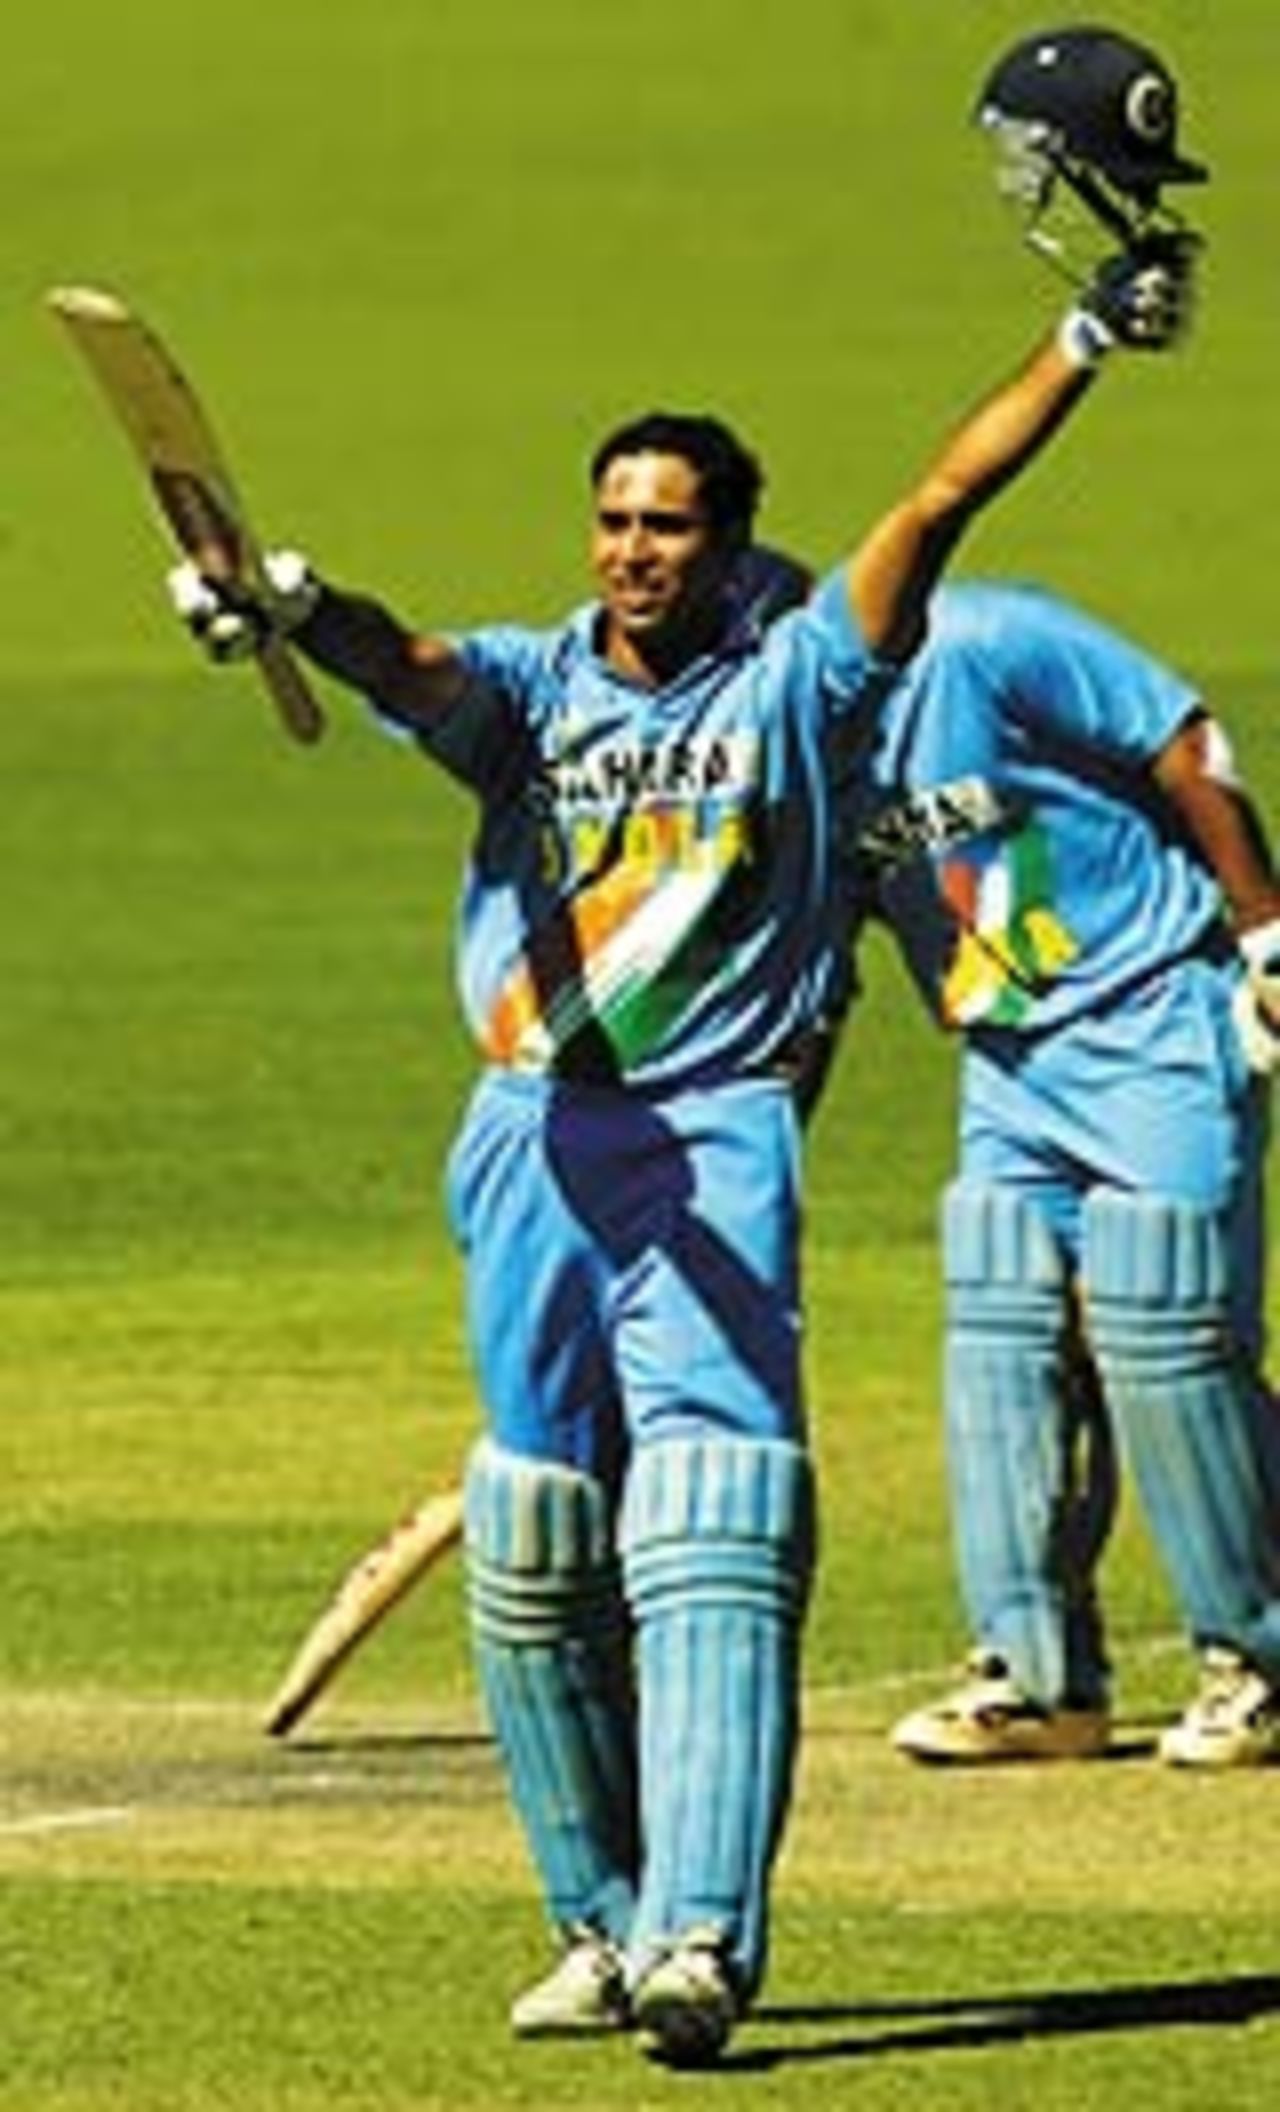 VVS Laxman acknowledges the applause after reaching his hundred, India v Zimbabwe, VB Series, 8th ODI, Adelaide, January 24, 2004